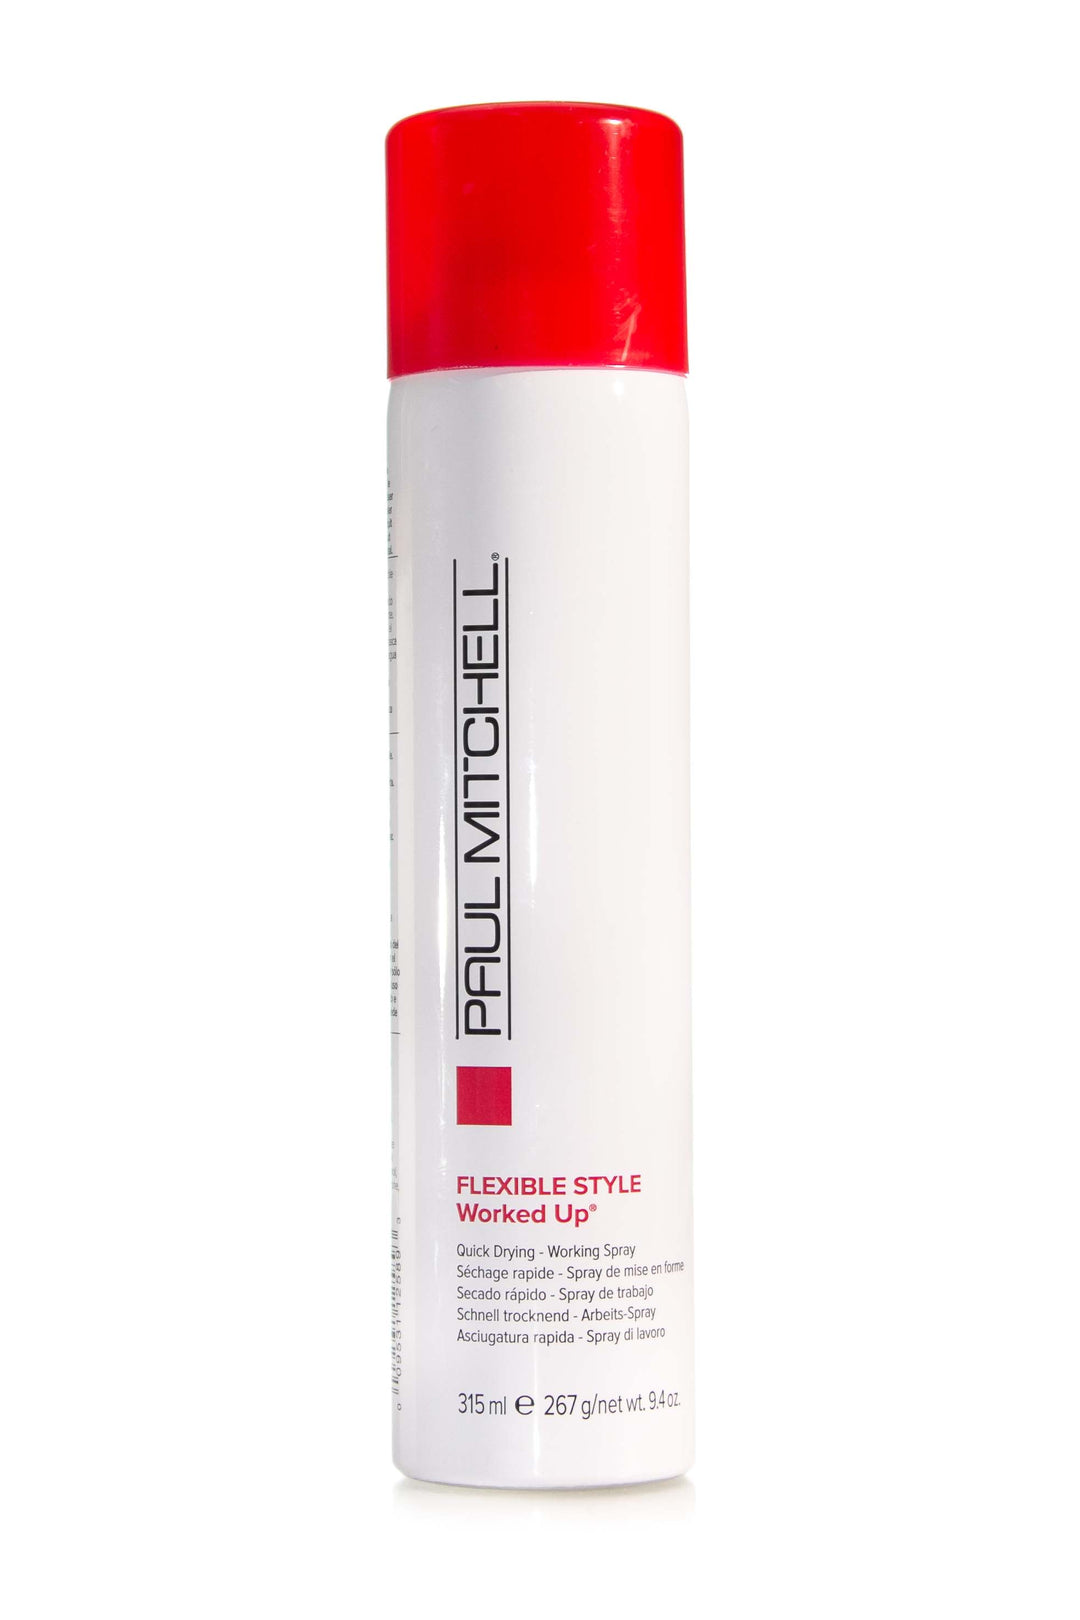 paul-mitchell-flexible-style-worked-up-315ml